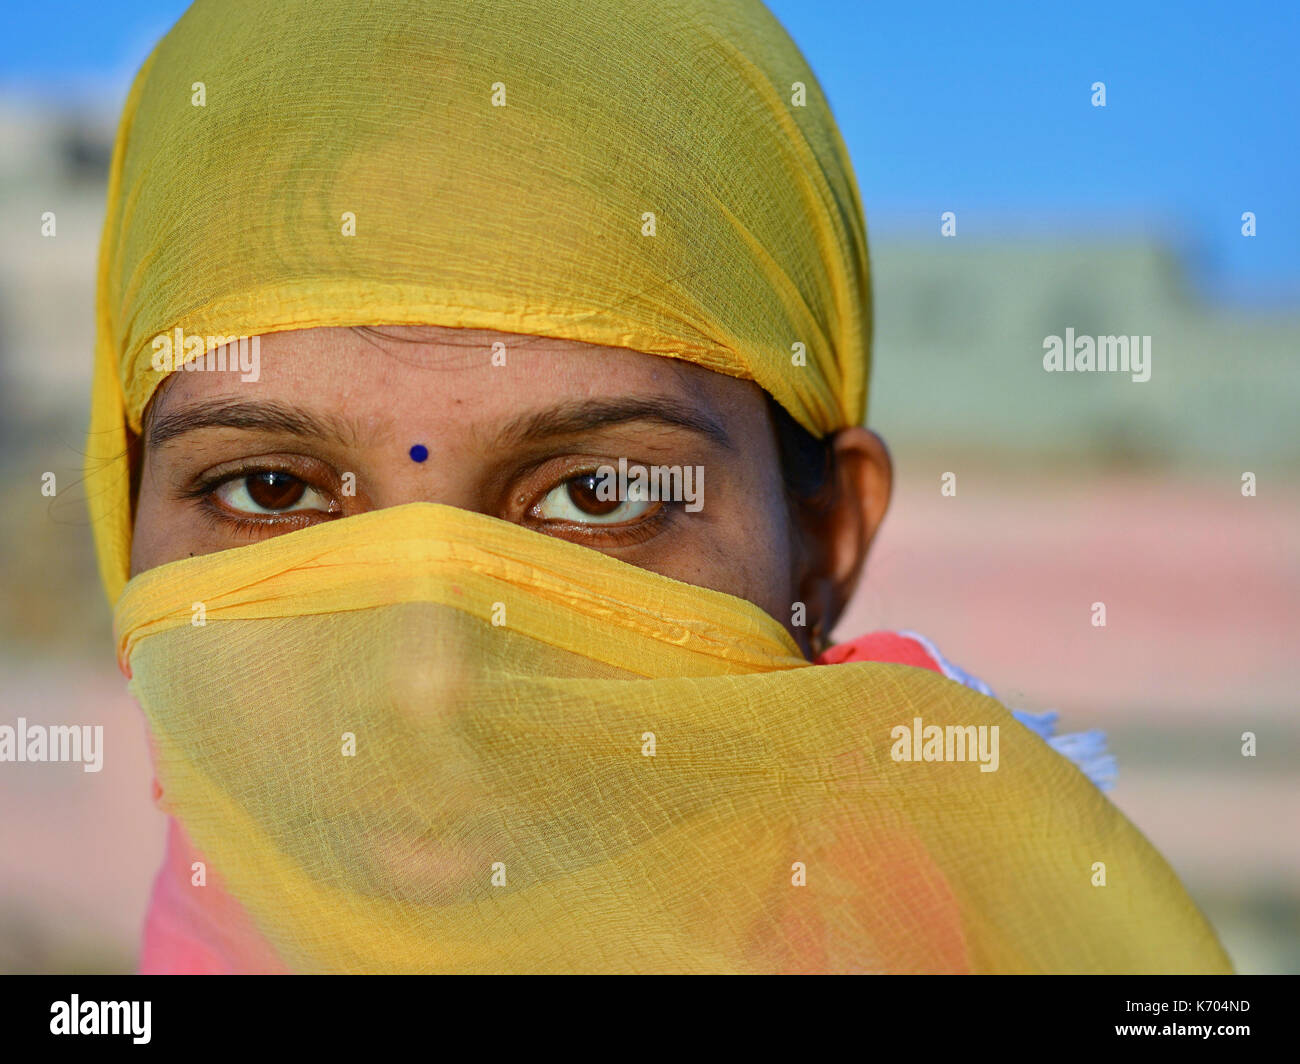 Young Indian woman covers her hair and face with a trendy secular, half-sheer yellow headscarf and poses for the camera. Stock Photo